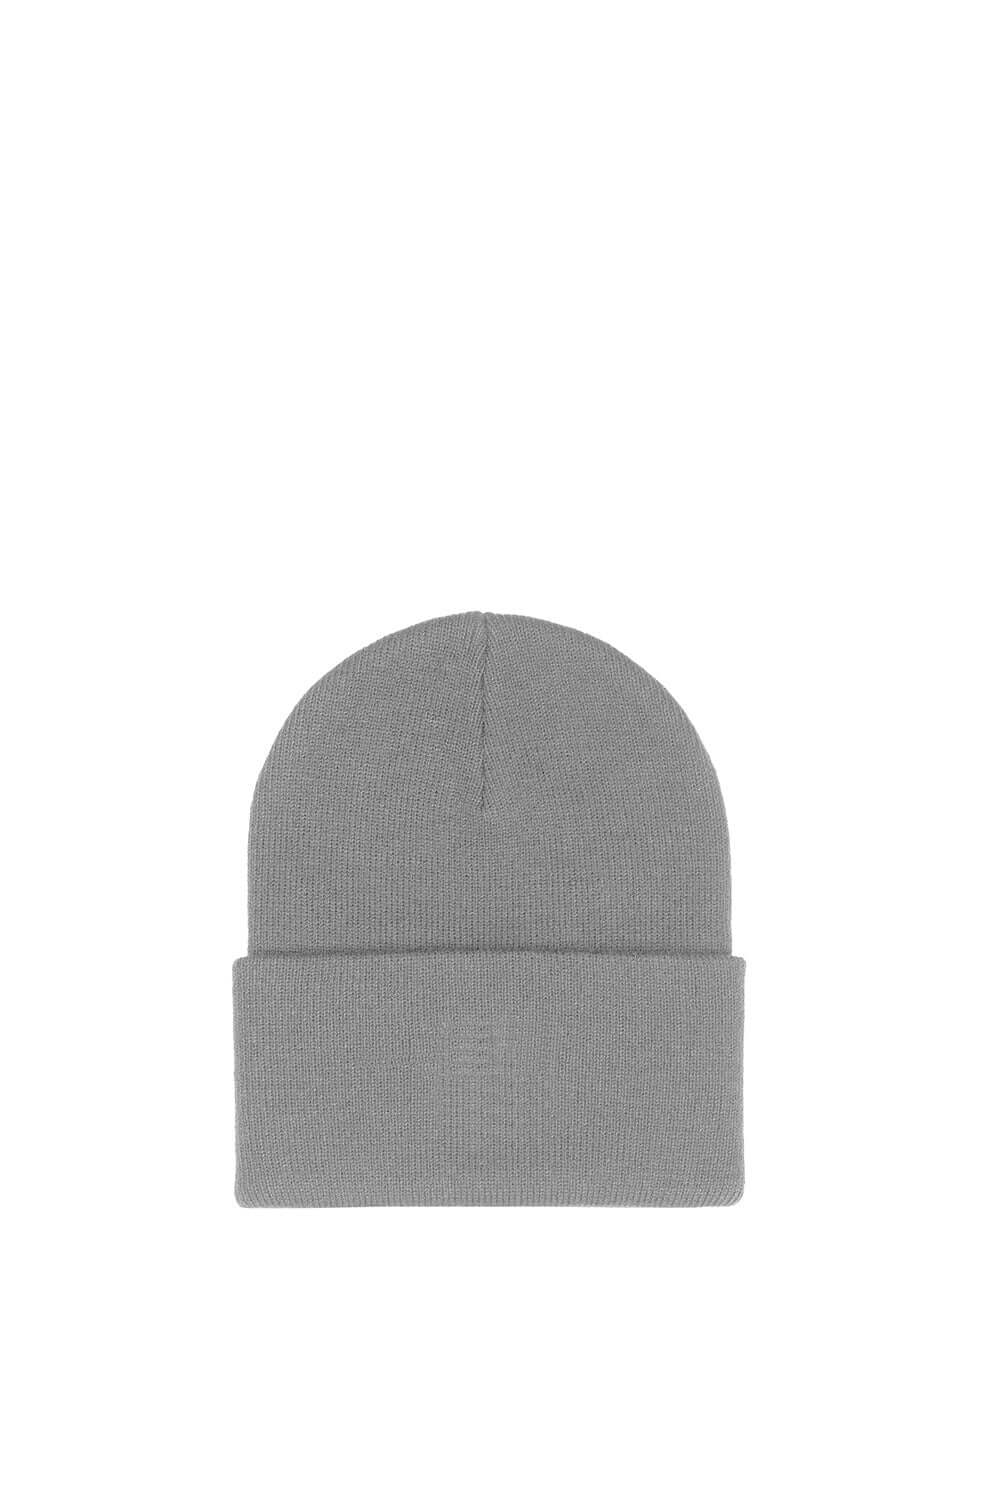 HTC LOGO BEANIE WARM WINTER HTC Los Angeles shield logo embroidered on the front. One size fit all. Color: Grey HTC LOS ANGELES